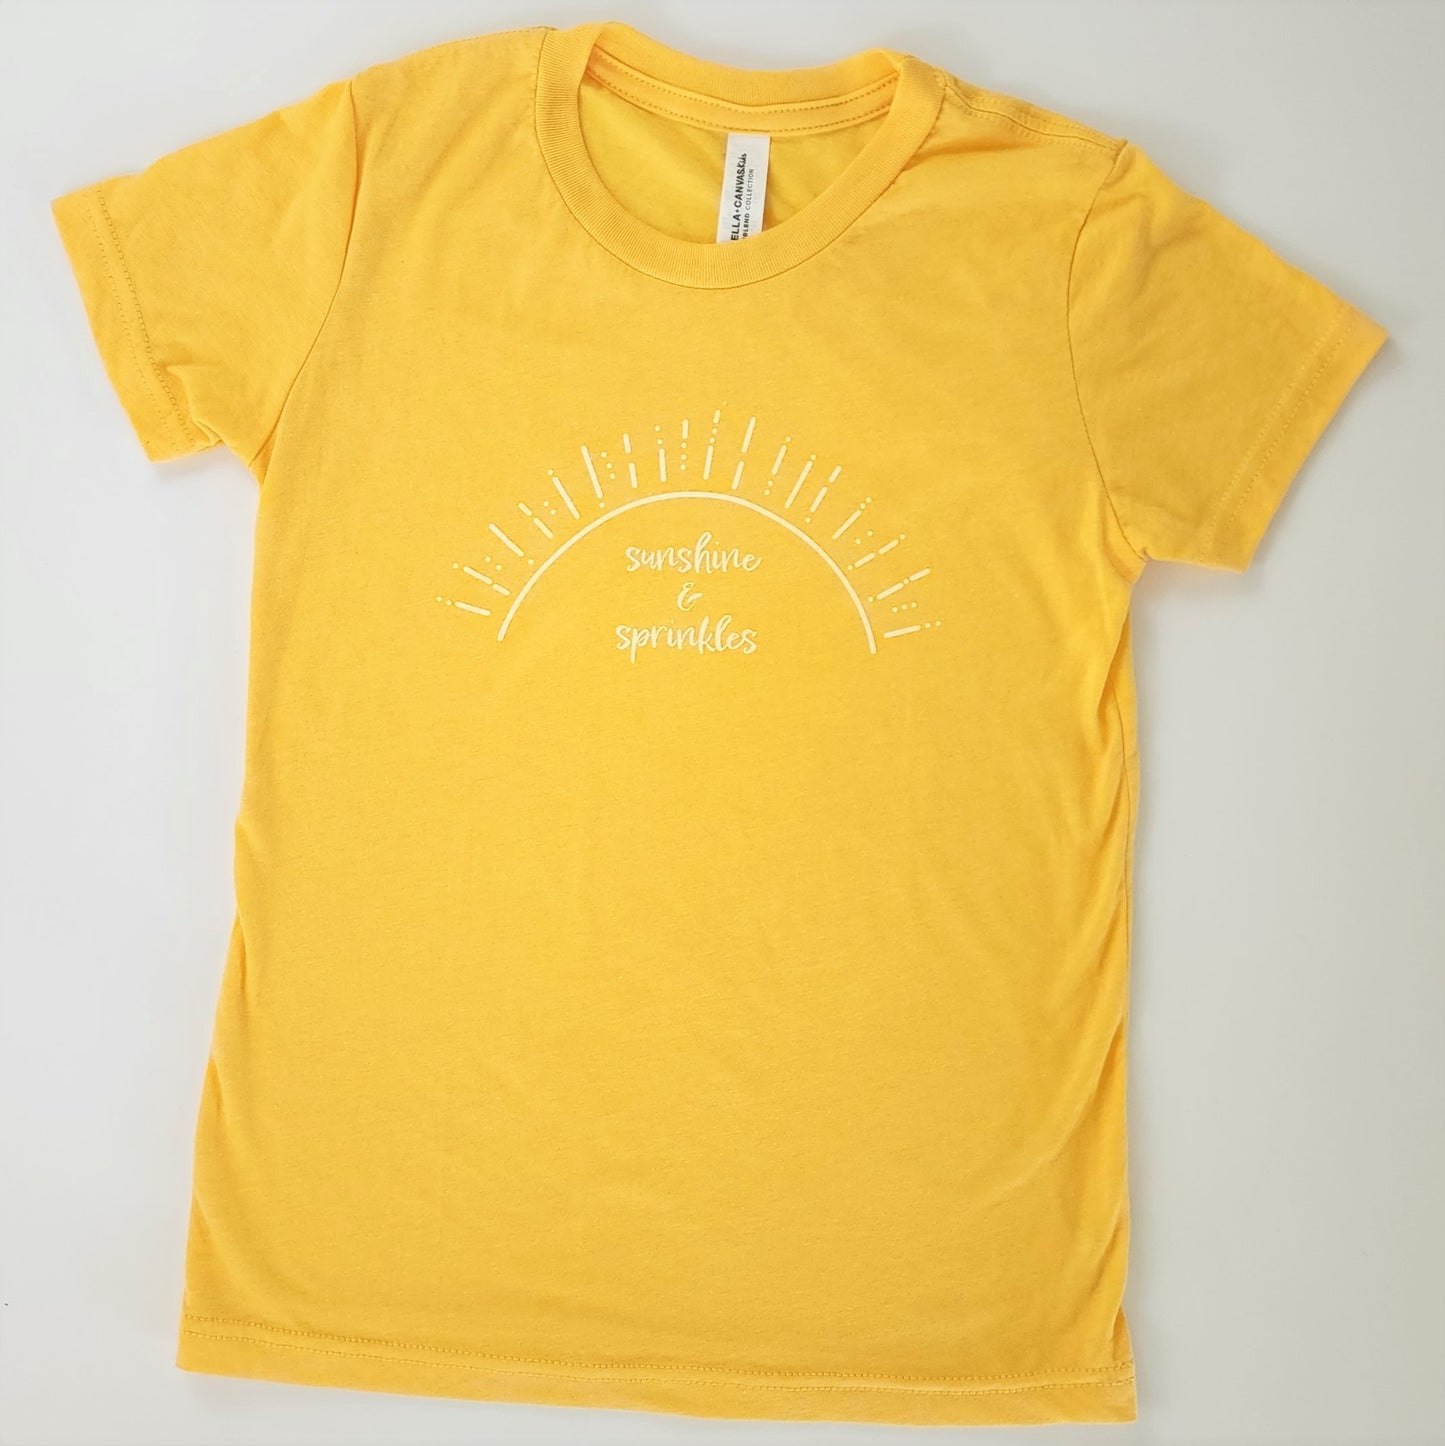 A soft sunflower-yellow short-sleeved t-shirt has white screen printing of the words “sunshine & sprinkles” written in a whimsical, almost cursive font across the center chest. The words are framed by an abstract half sun with rays of sprinkley sunshine shooting out.